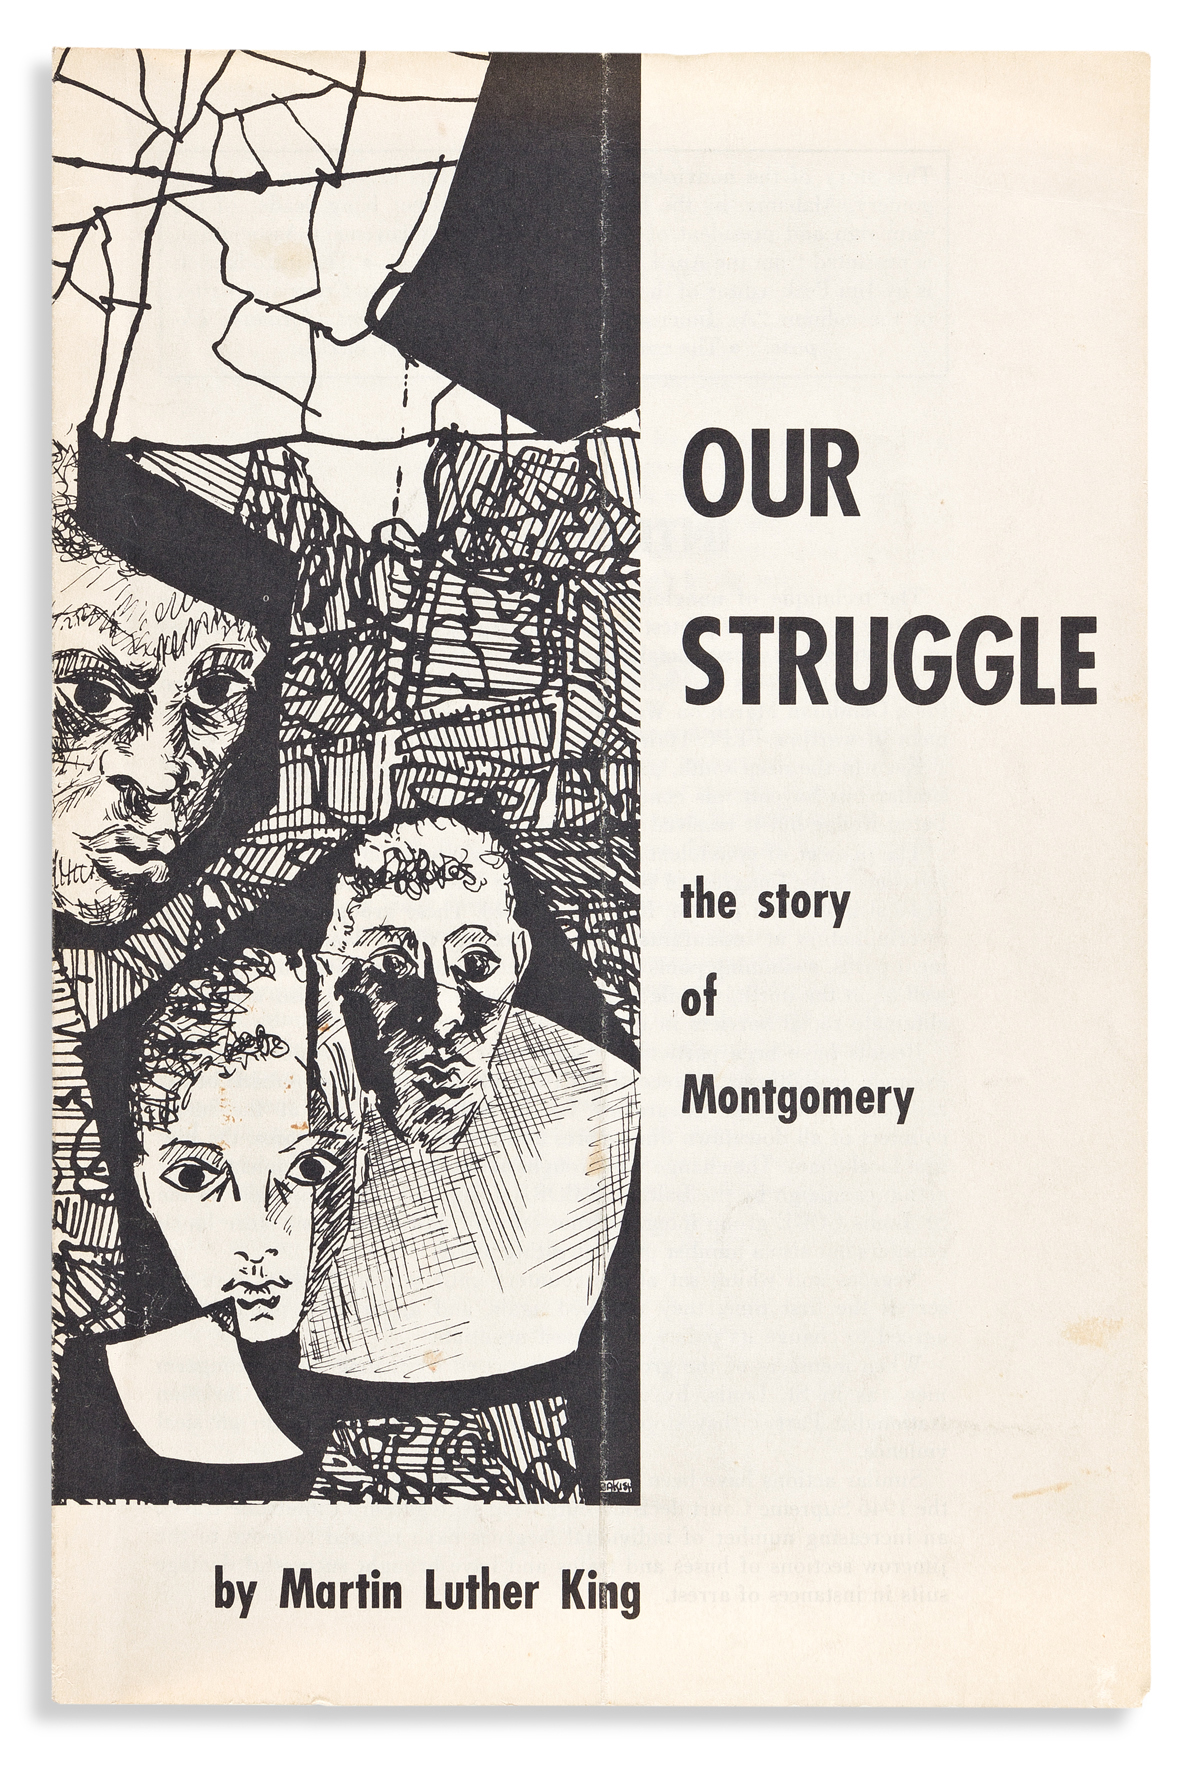 (MARTIN LUTHER KING.) Our Struggle: The Story of Montgomery.